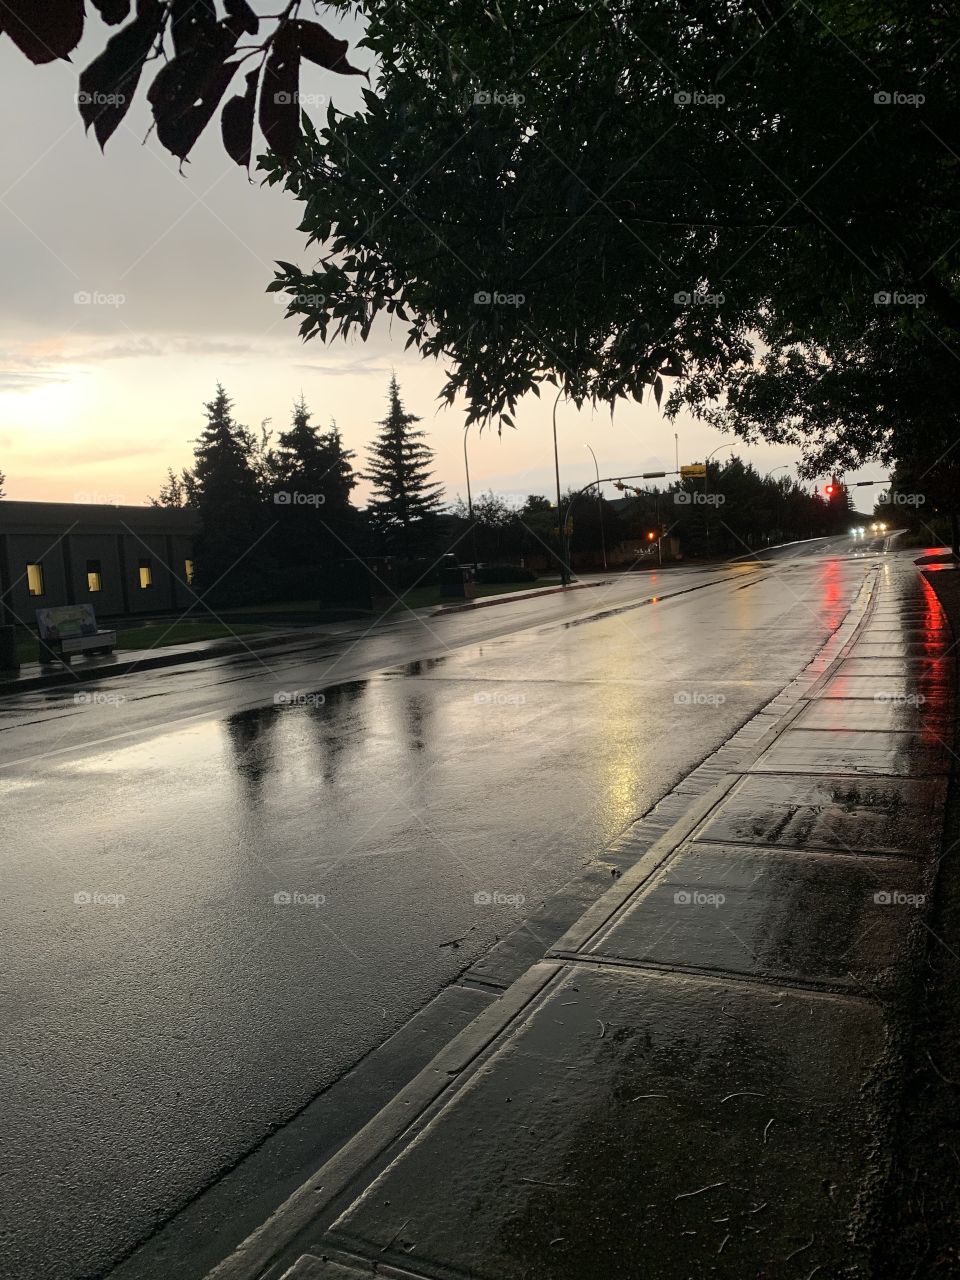 Reflection of lights on wet road. After rain beauty. Adorable sky and trees. 